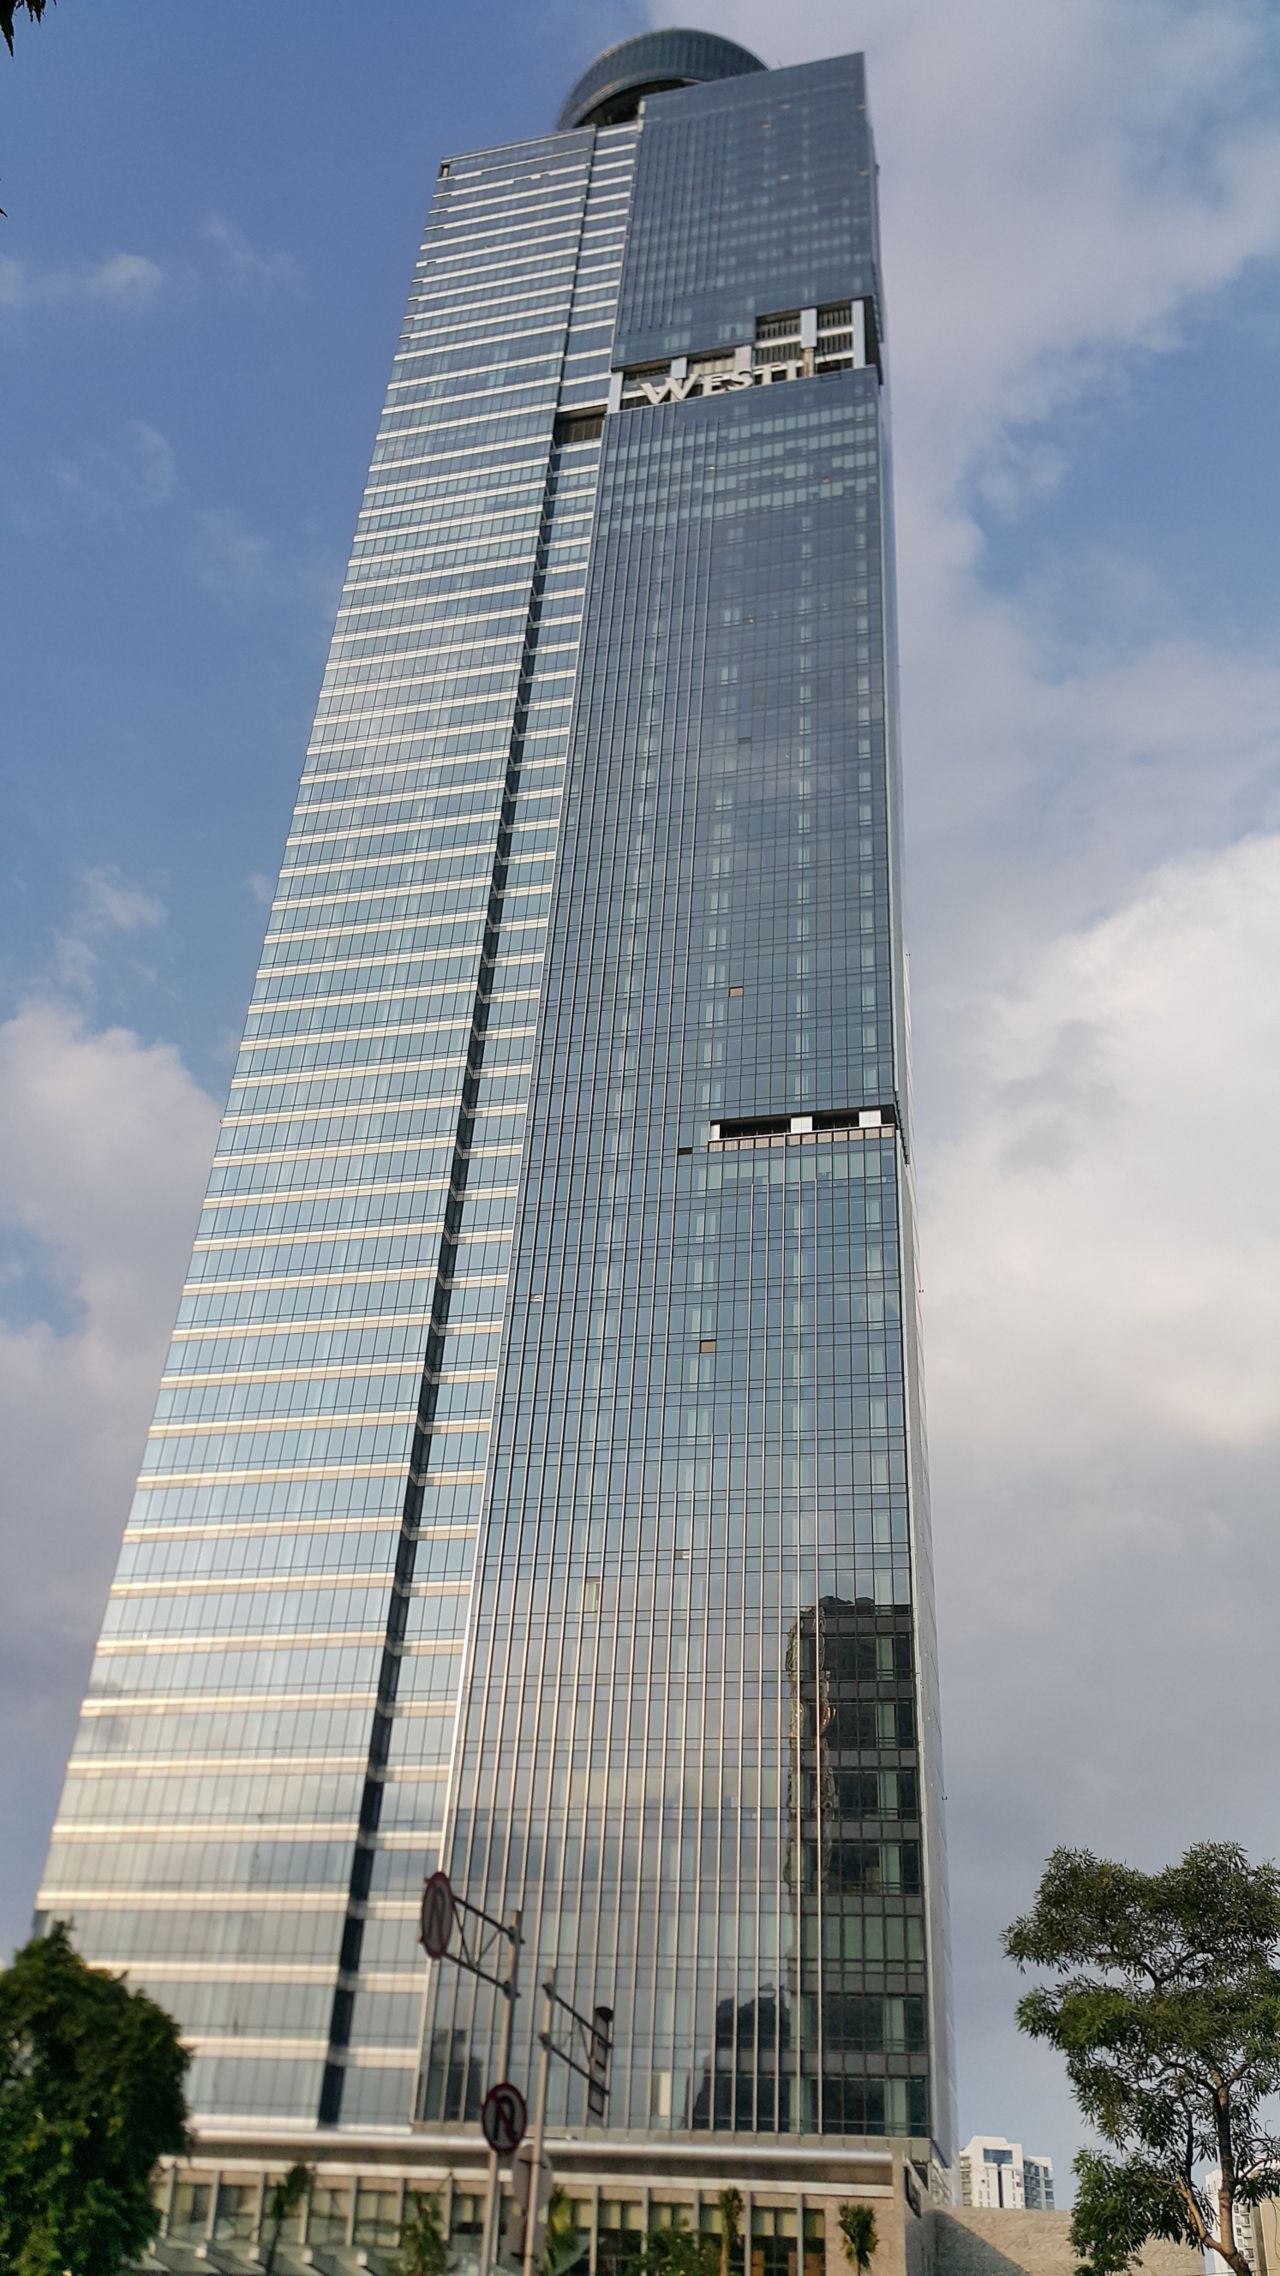 High rise tower with glass facade